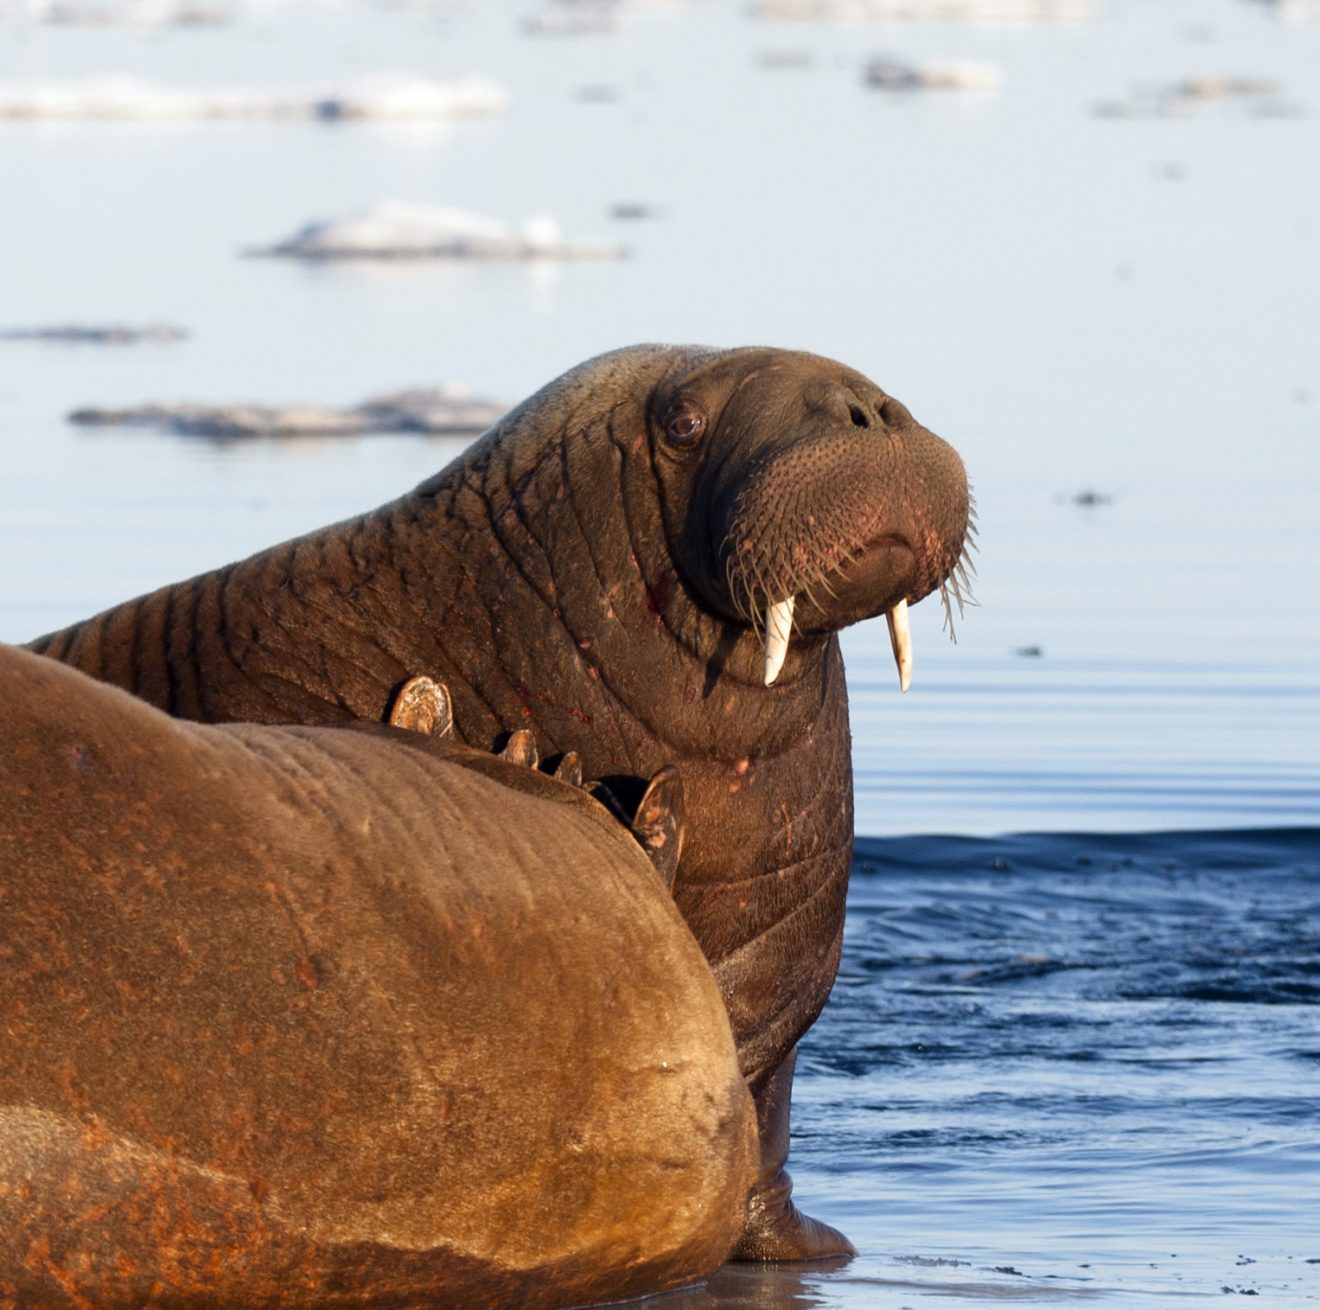 Casey Clark photoTwo Pacific walruses relax on sea ice in the Chukchi Sea.